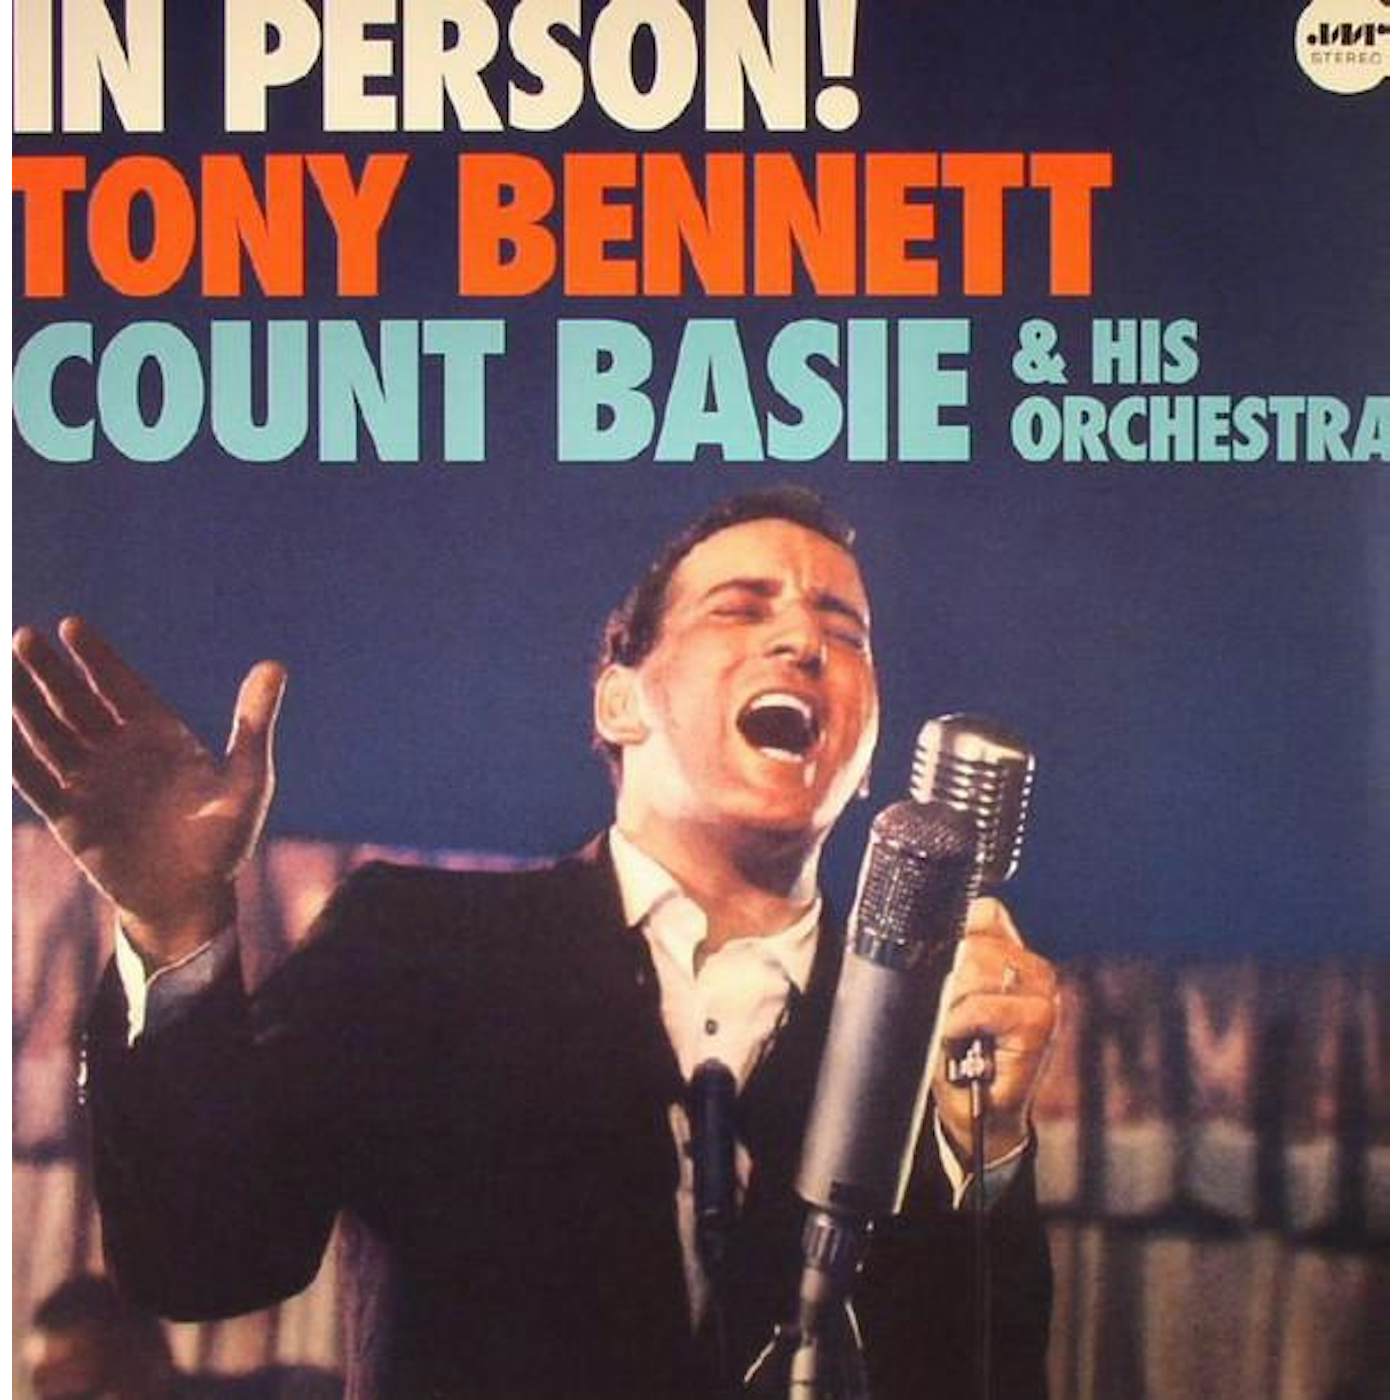 Tony Bennett & The Count Basie Orchestra In Person! Vinyl Record